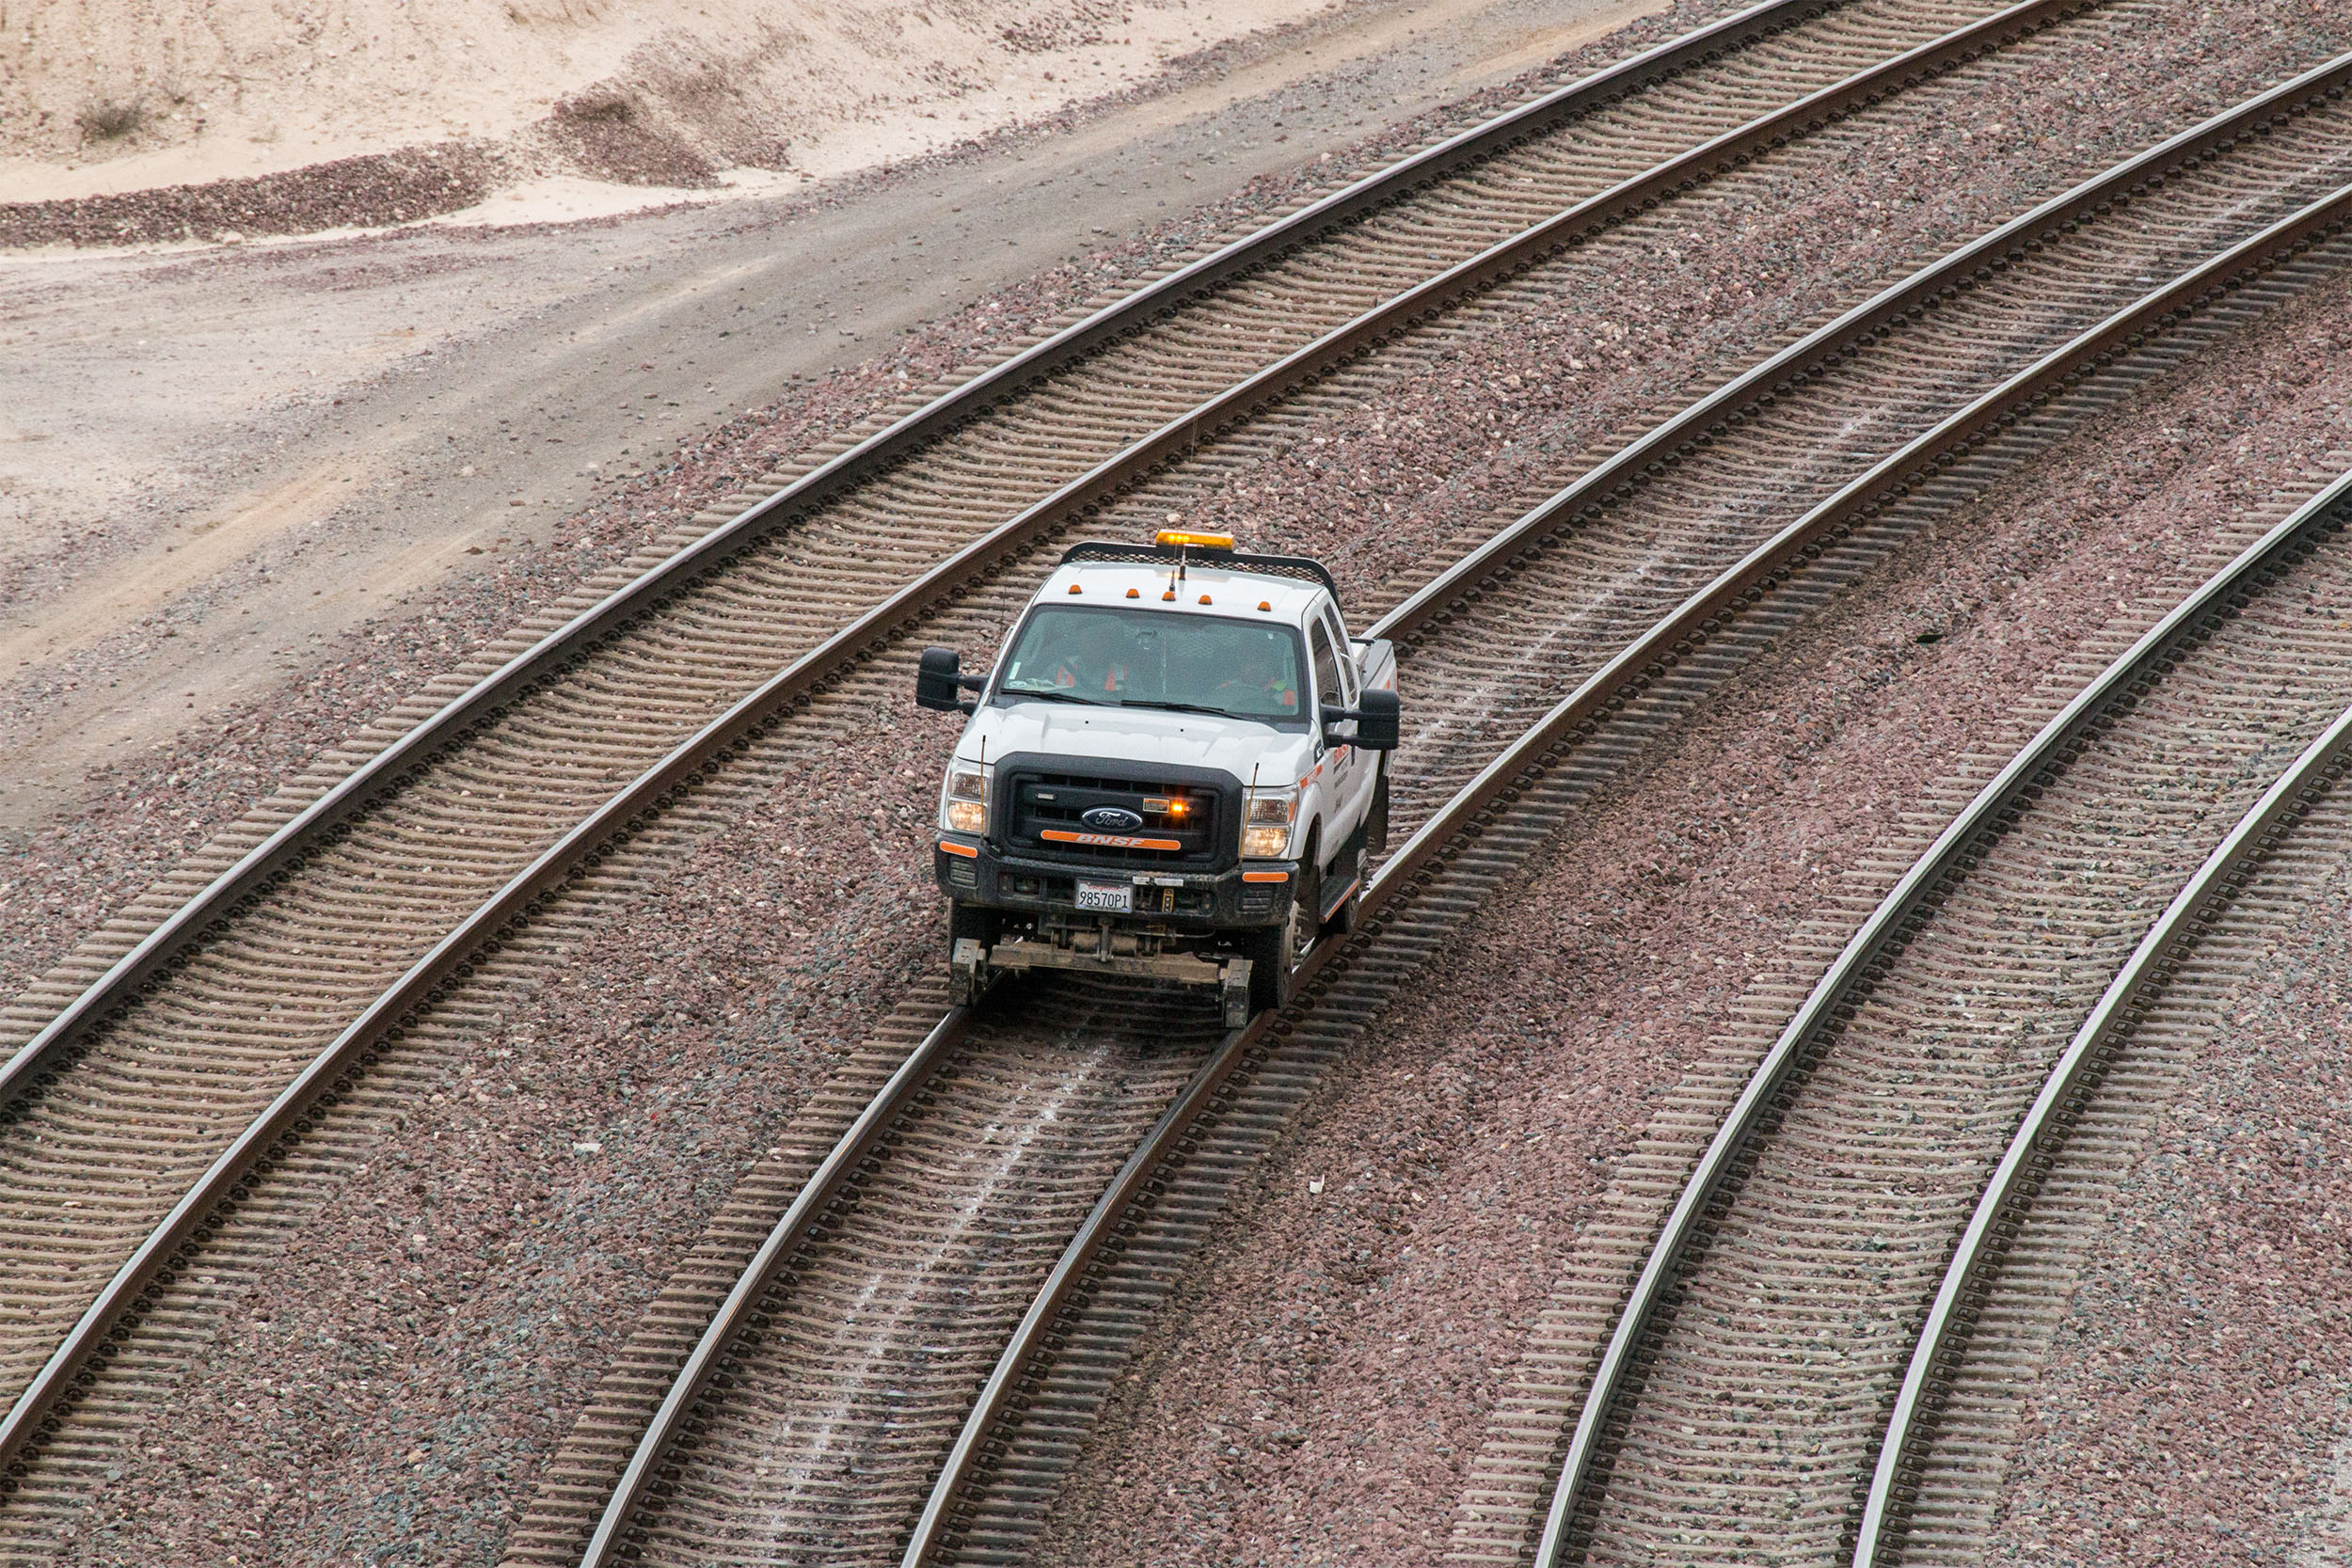 Hyrail vehicles can travel on both train tracks and roads. 